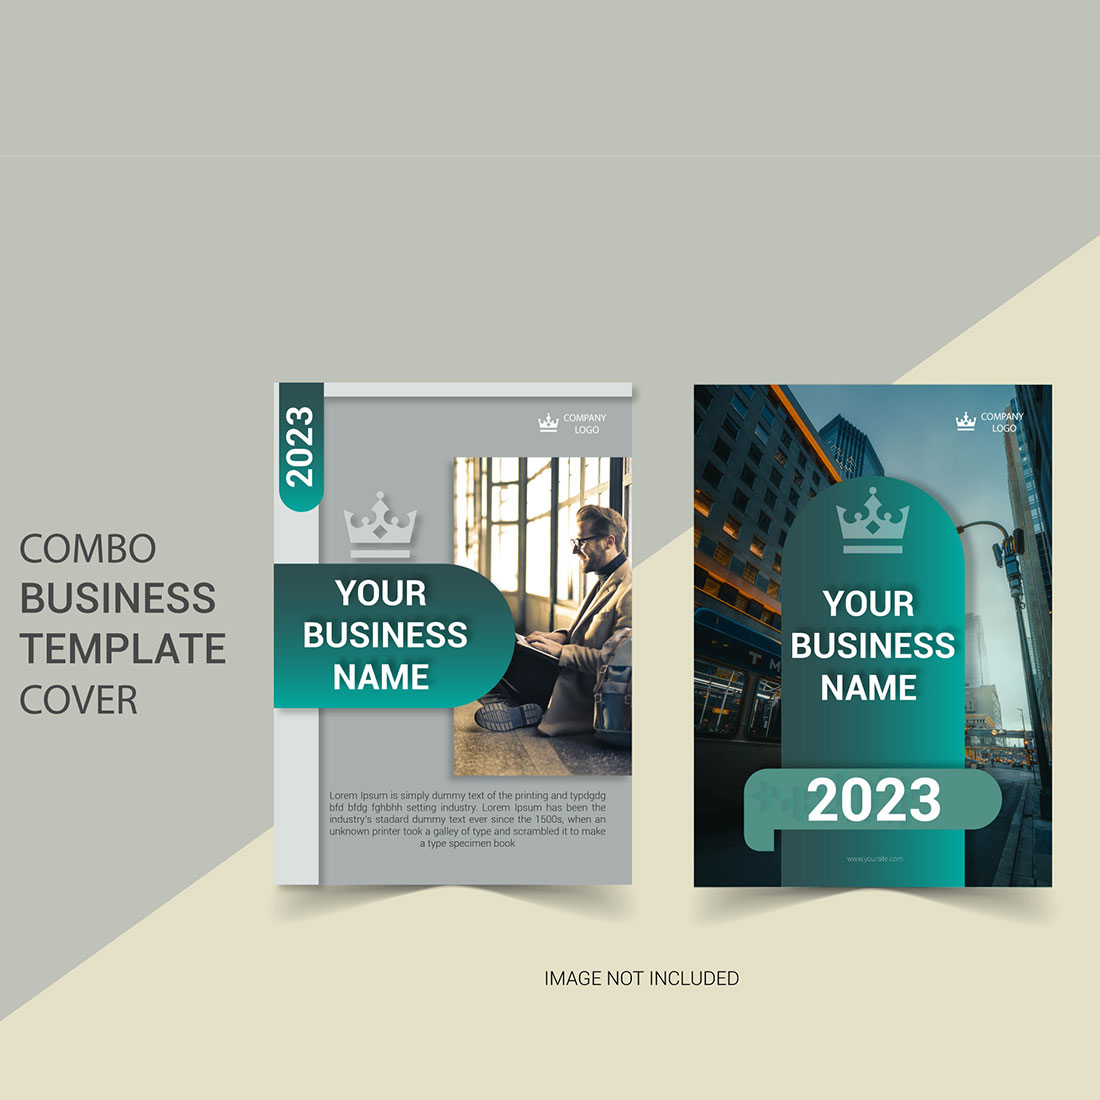 Combo business template cover preview image.